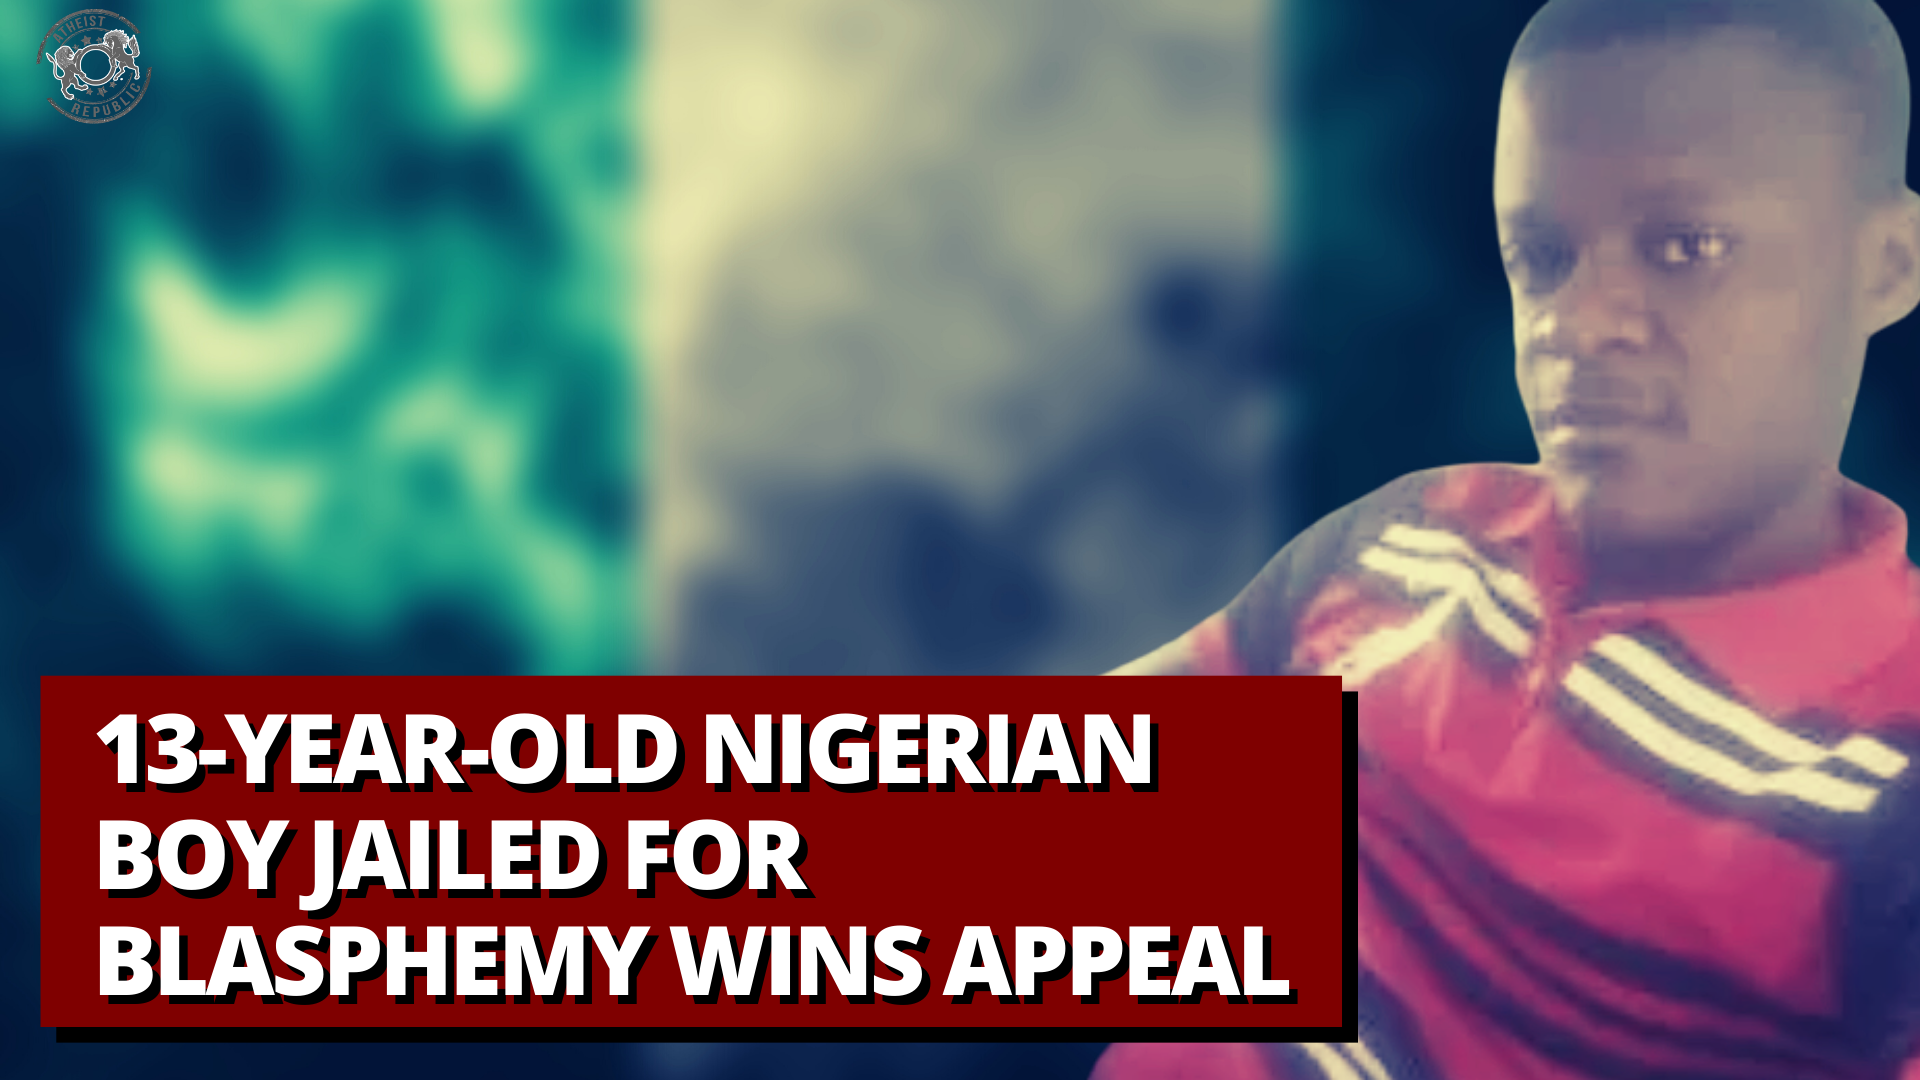 13-Year-Old Nigerian Boy Jailed for Blasphemy Wins Appeal